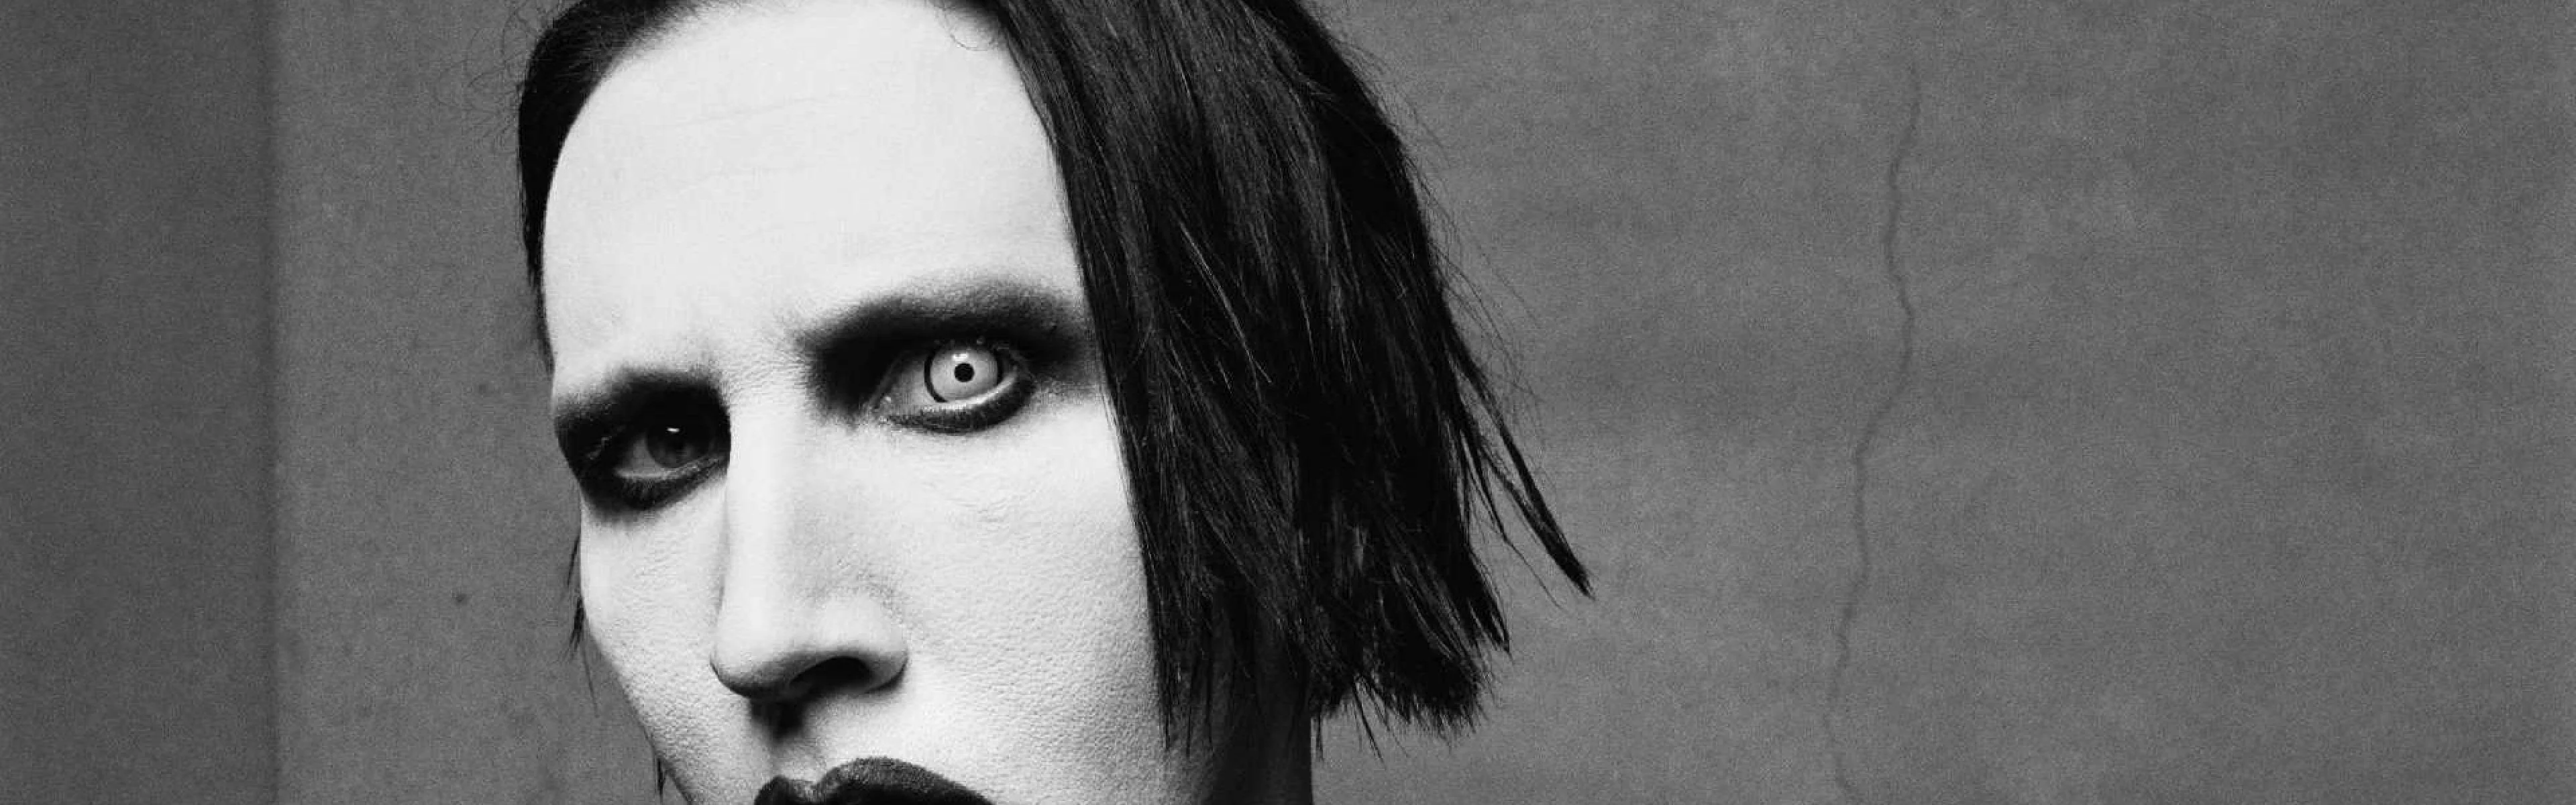 HD Marilyn Manson 4k Pics for Android. 0.418 MB